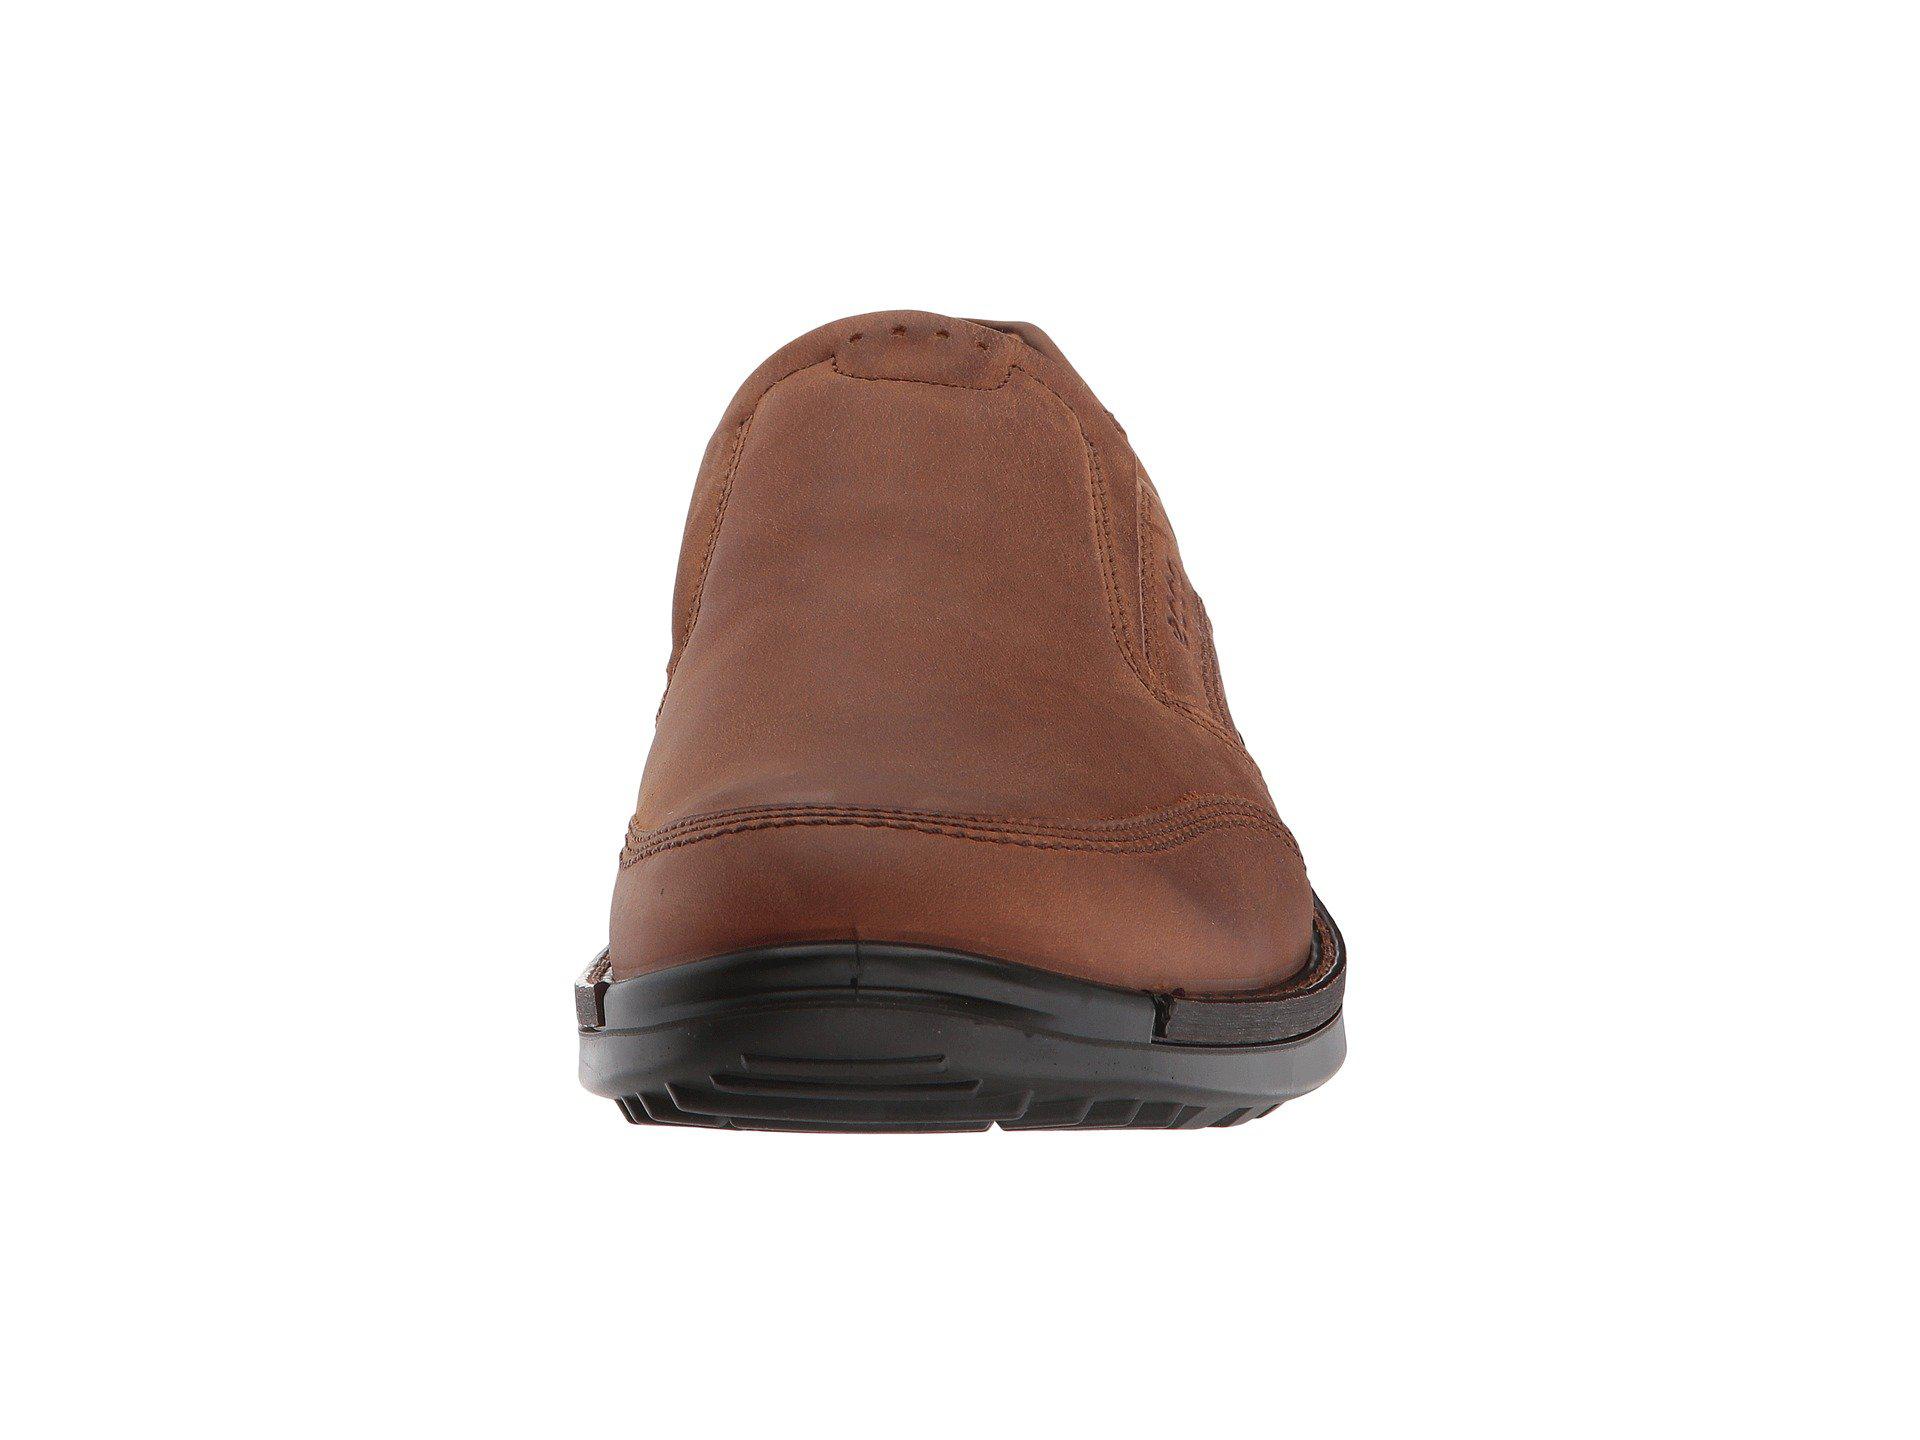 Ecco Fusion Ii Slip-on Shoes in Brown for Lyst